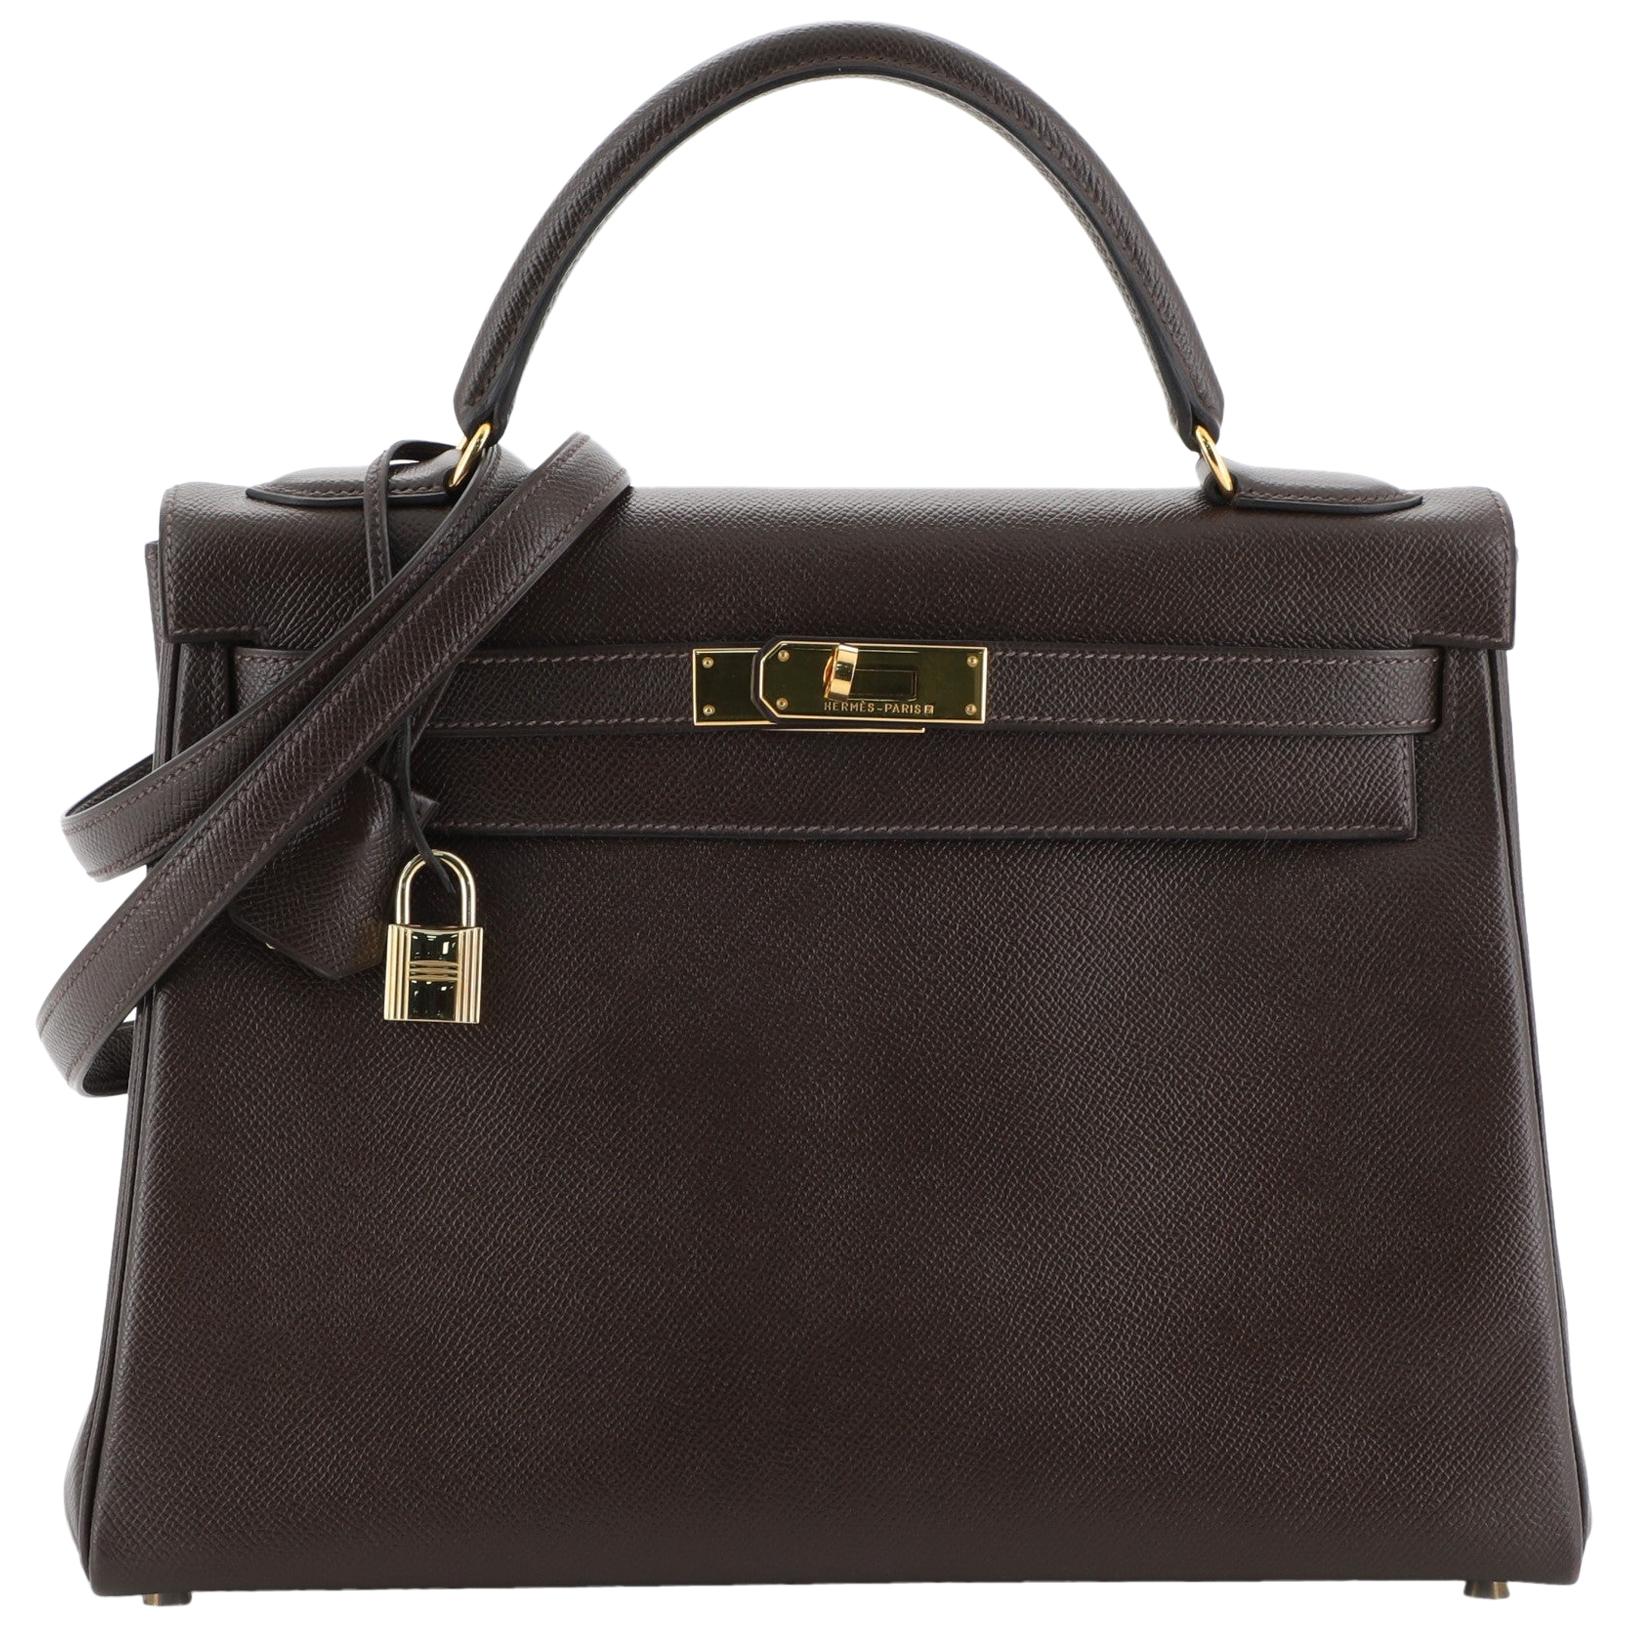 Hermes Kelly Handbag Chocolate Courchevel with Gold Hardware 32